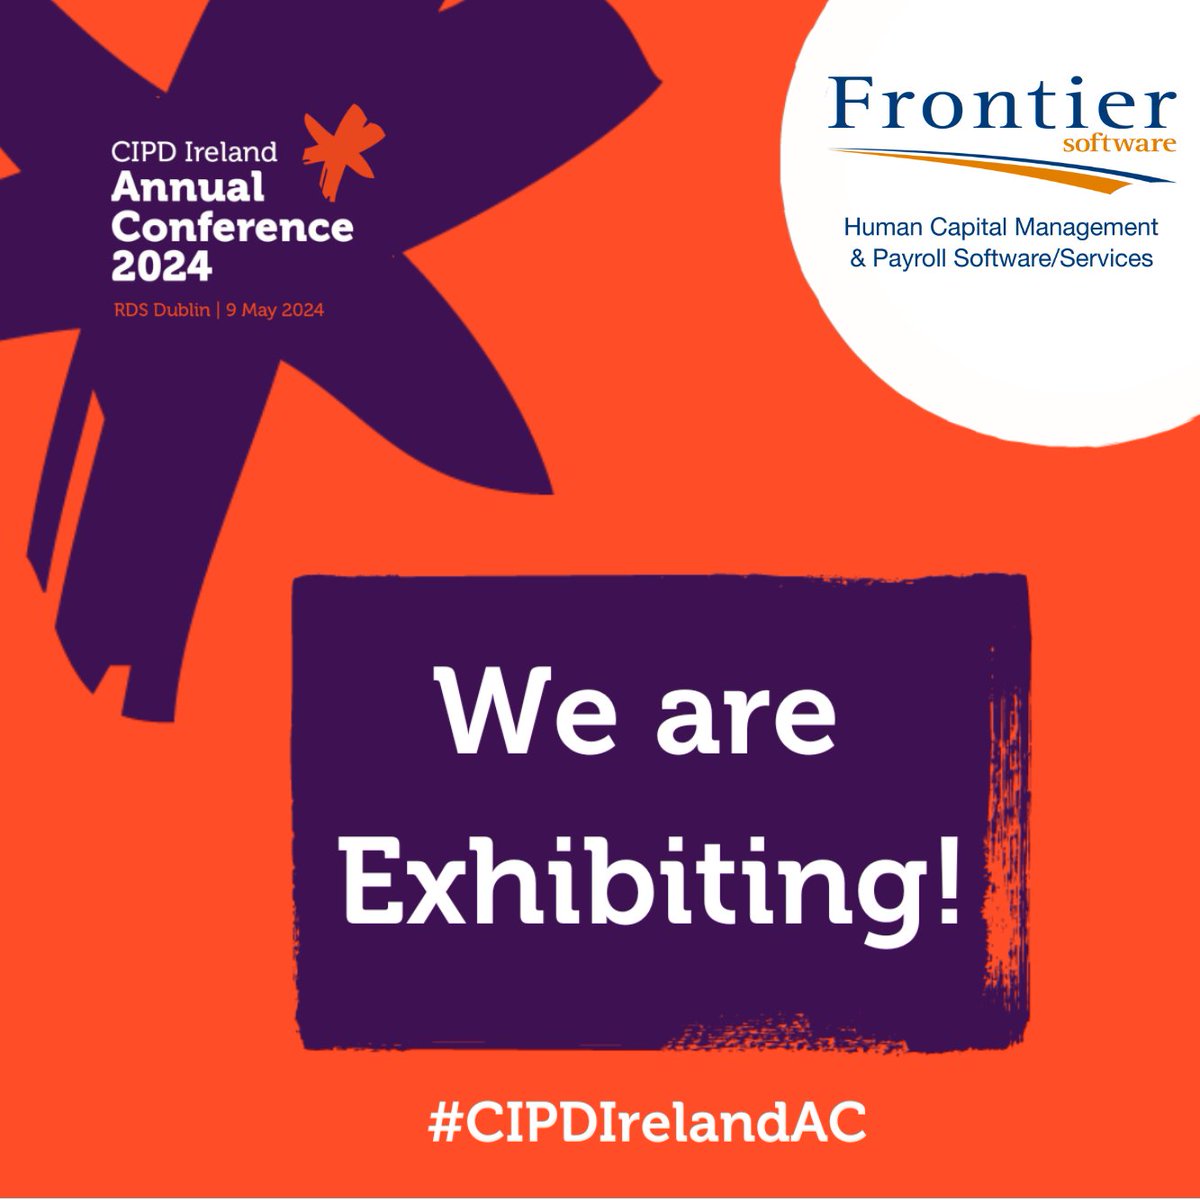 Frontier Software support @cipdireland Annual Conference. Join us next week at @TheRDS on stand A23! eu1.hubs.ly/H08TwBp0
#cipdireland #rds #dublin #conference #exhibition #hr #peopleprofession #payroll #hrtrends #learn #network #events2024